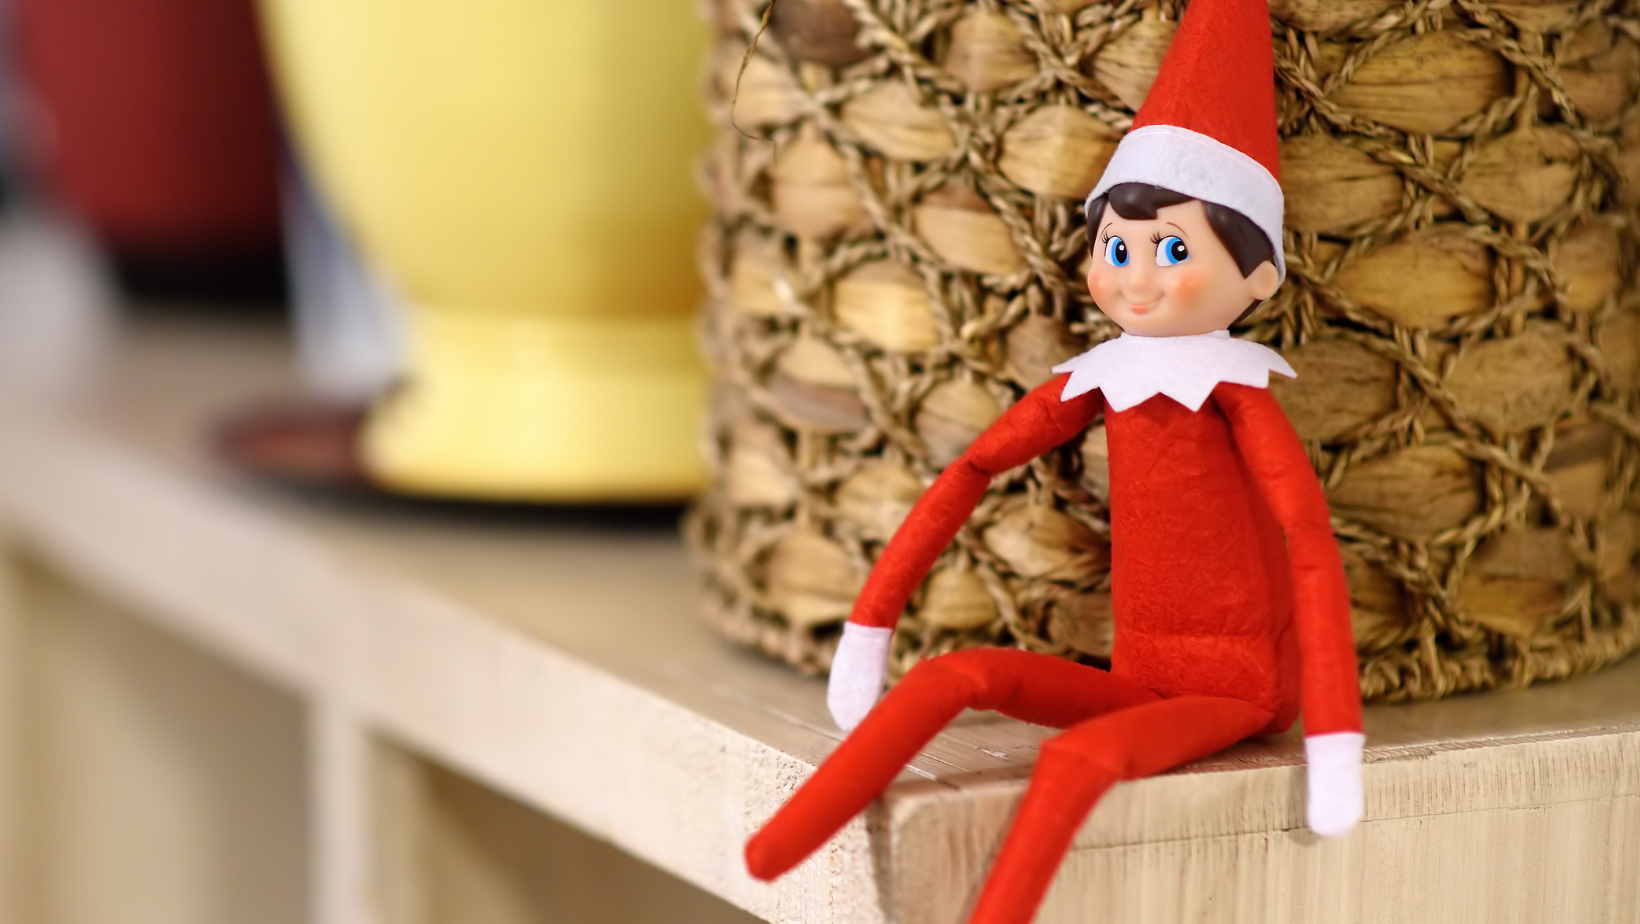 Easy Elf On The Shelf Ideas For Parents (You're Welcome)